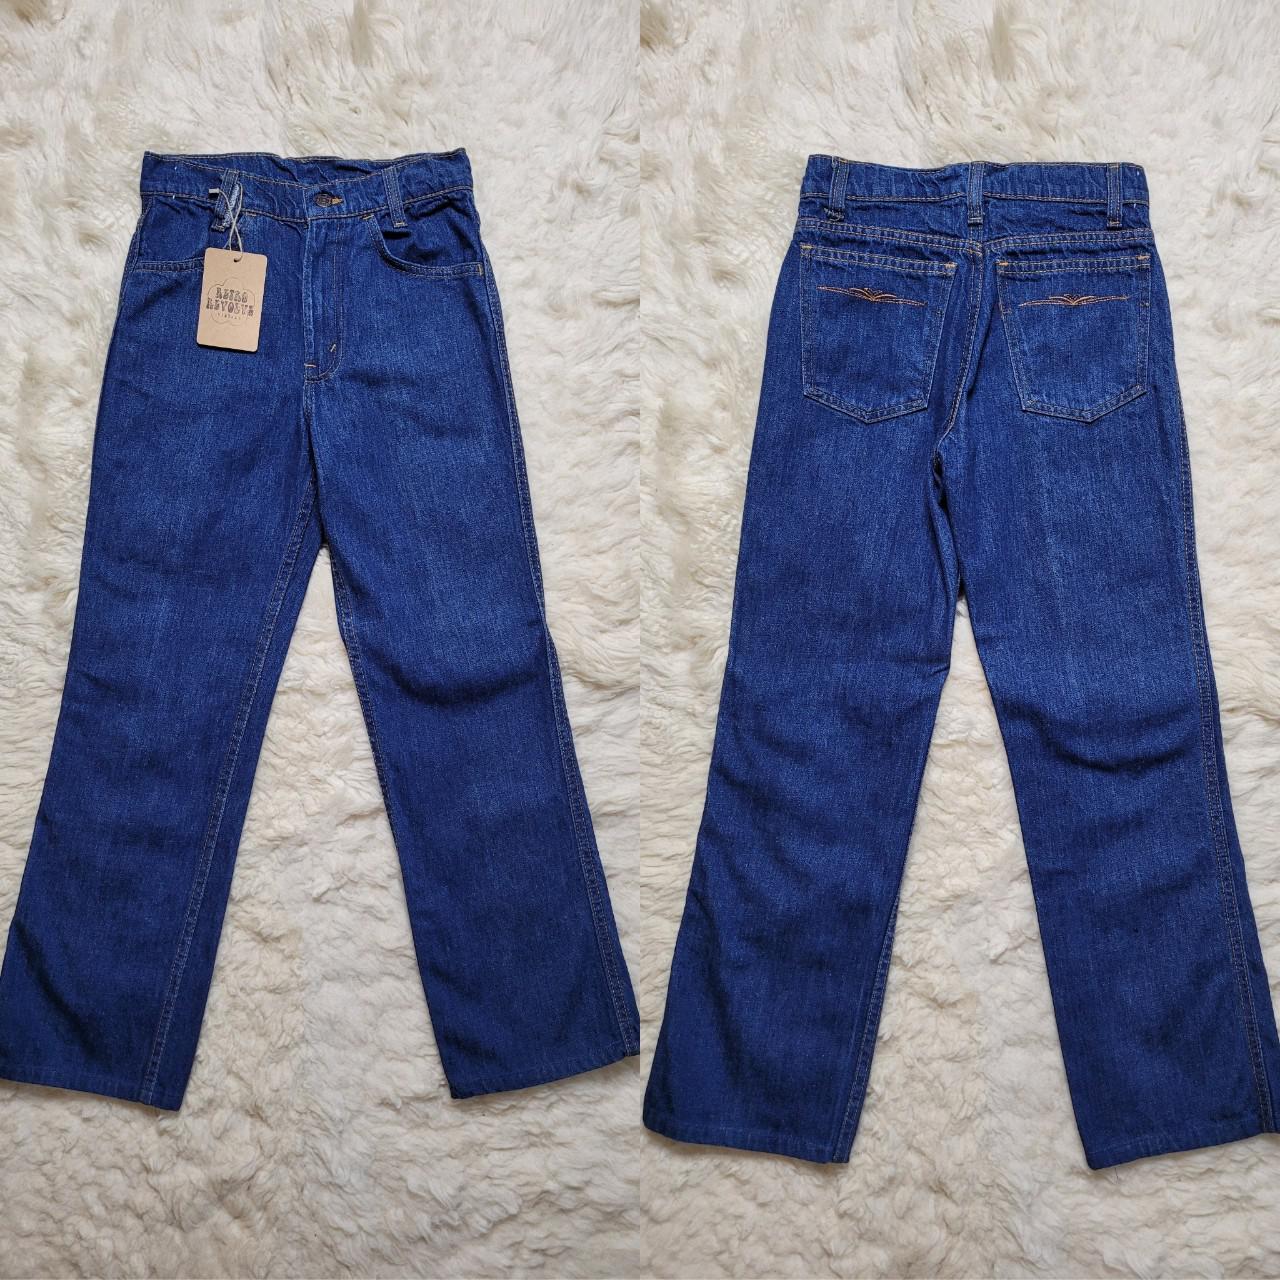 Vintage 80s Levi's Movin' On Jeans, Probably from...